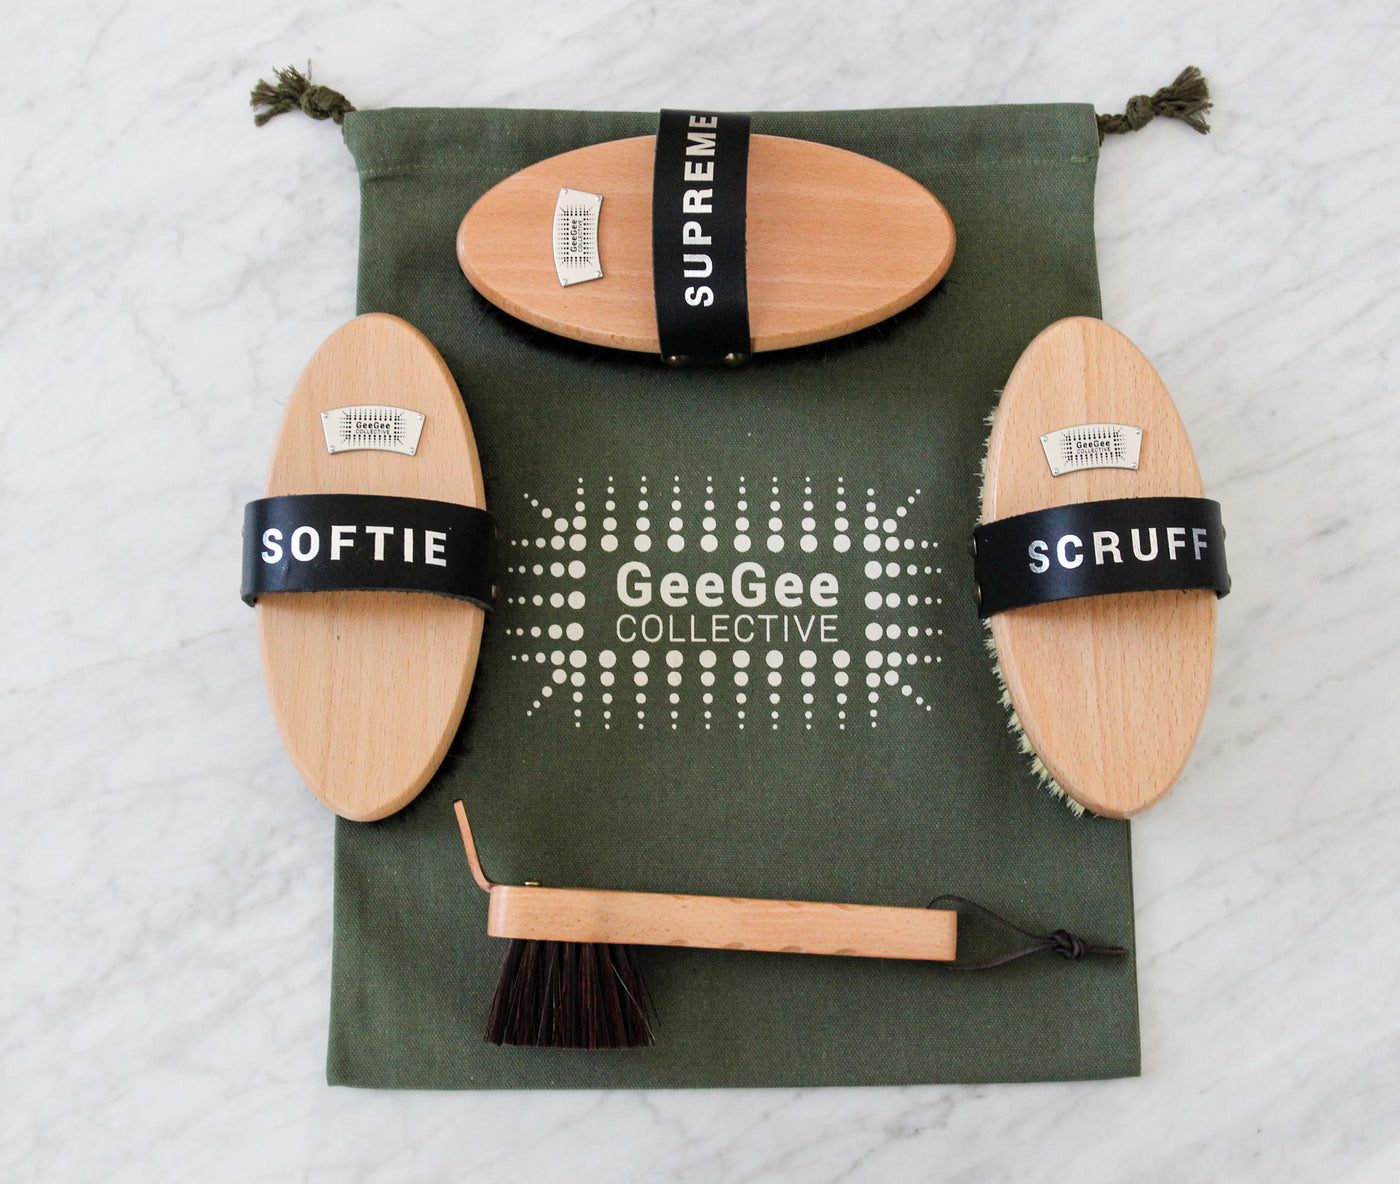 Express Equine Grooming Kit | By GeeGee COLLECTIVE